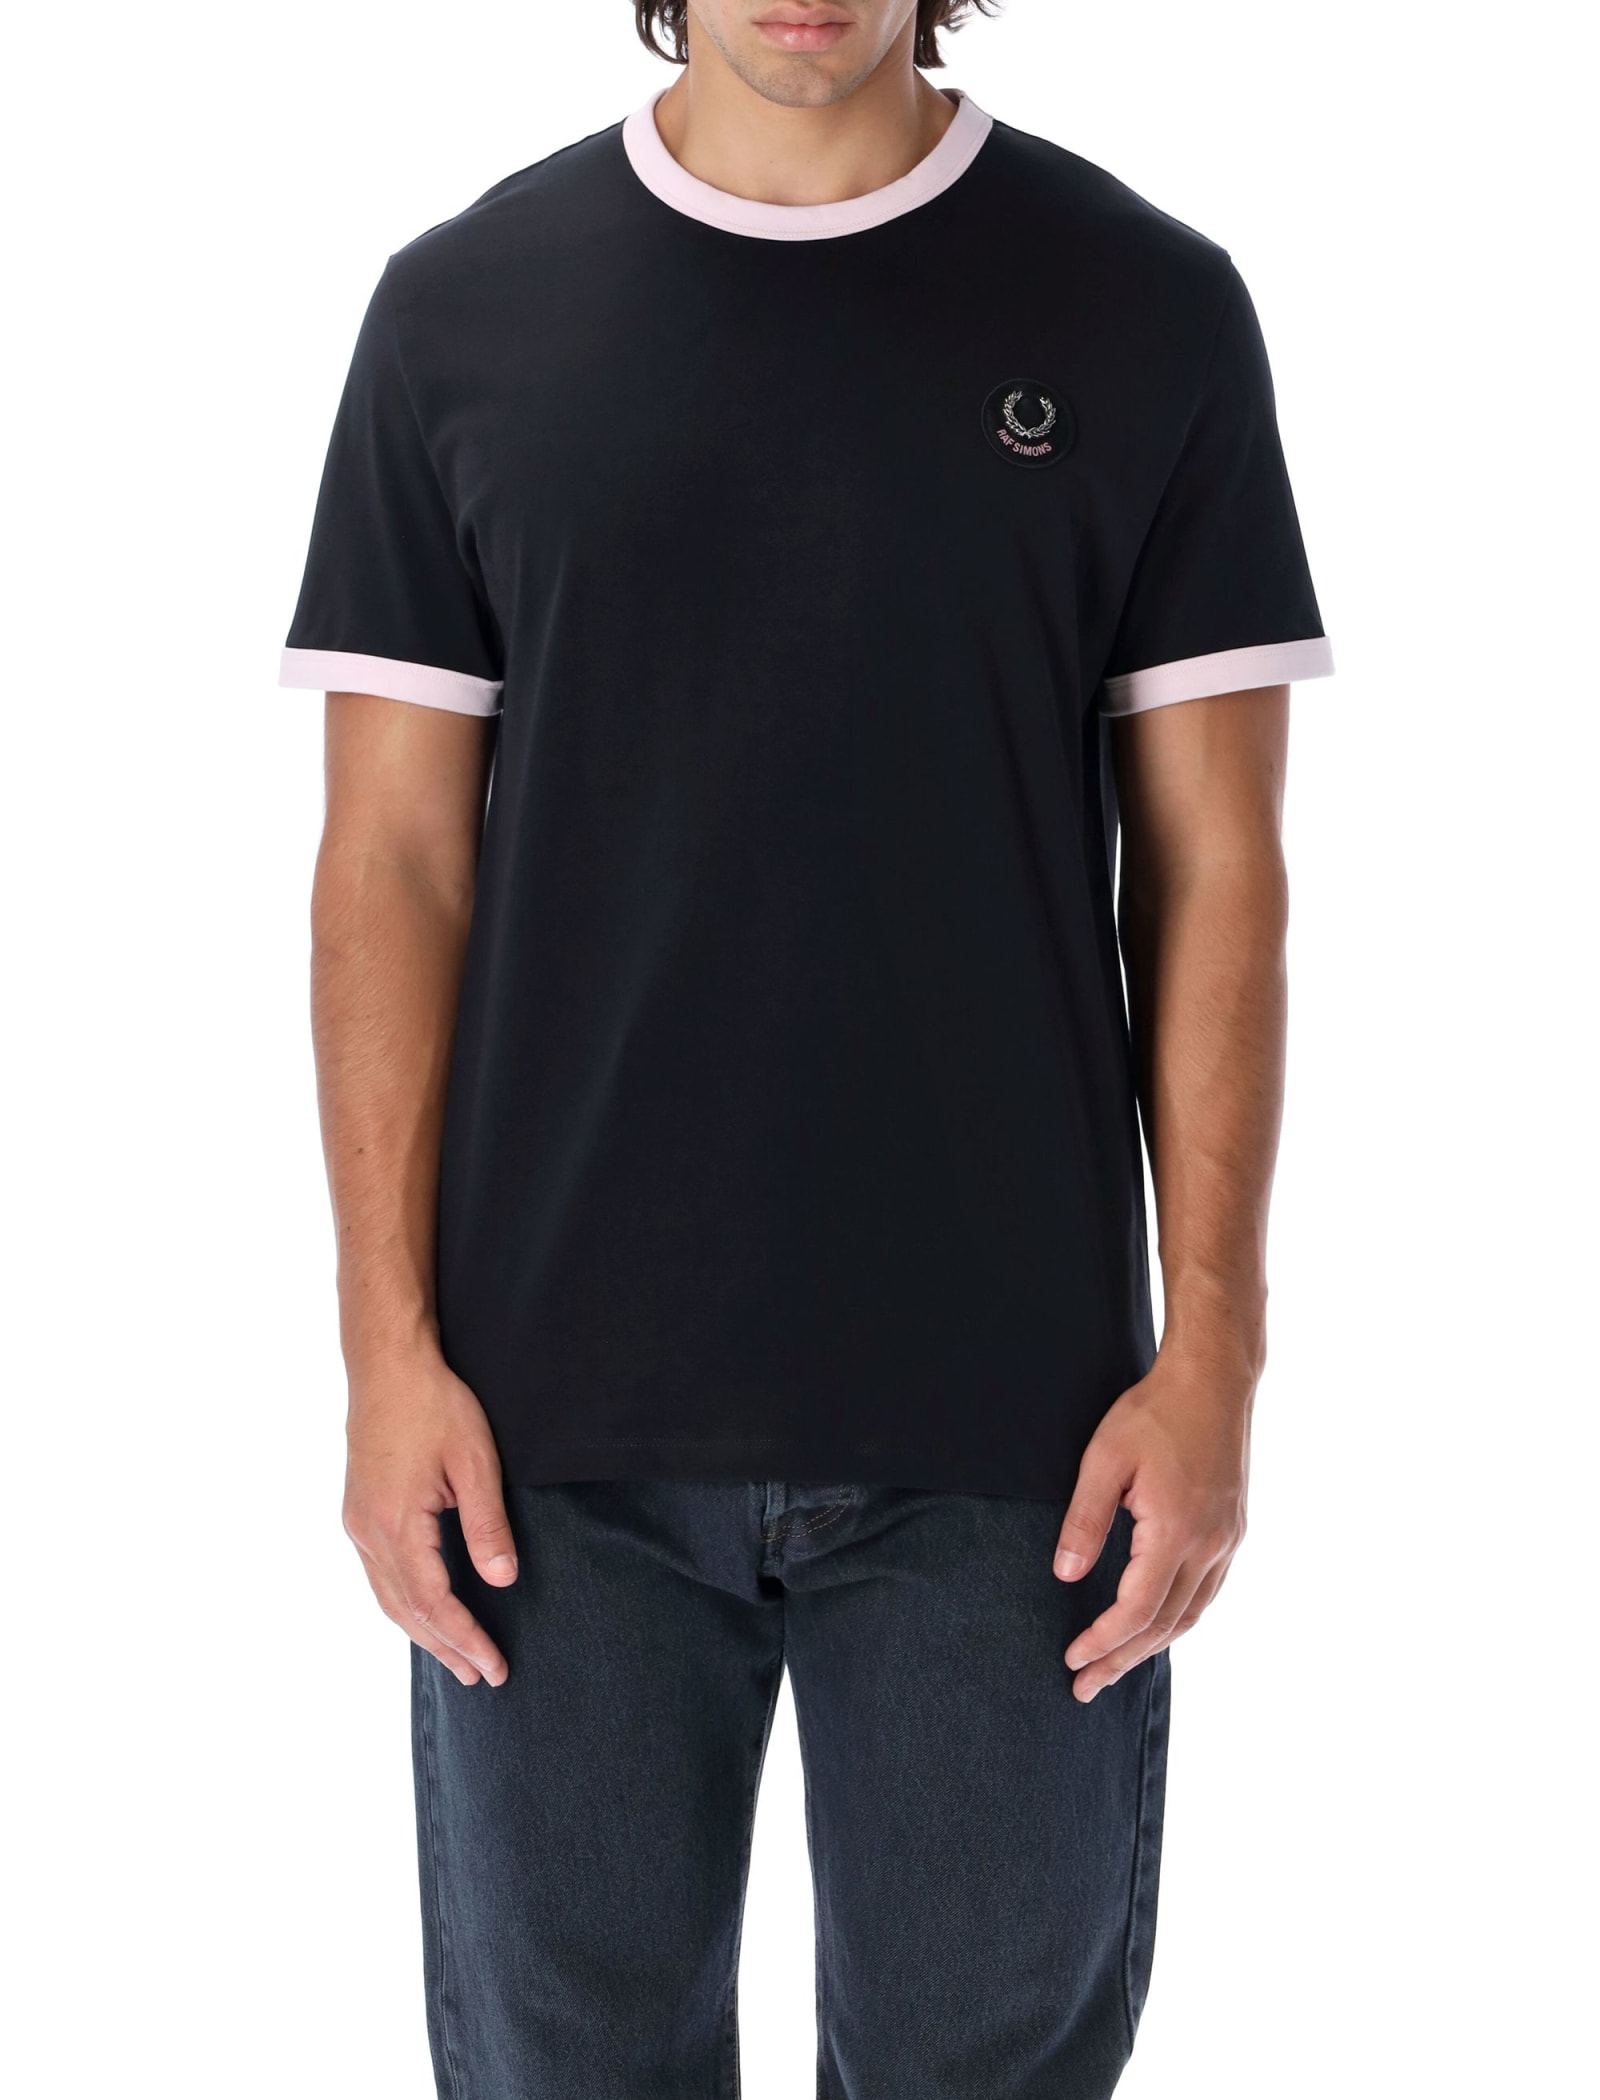 Fred Perry by Raf Simons Contrast Trim T-shirt